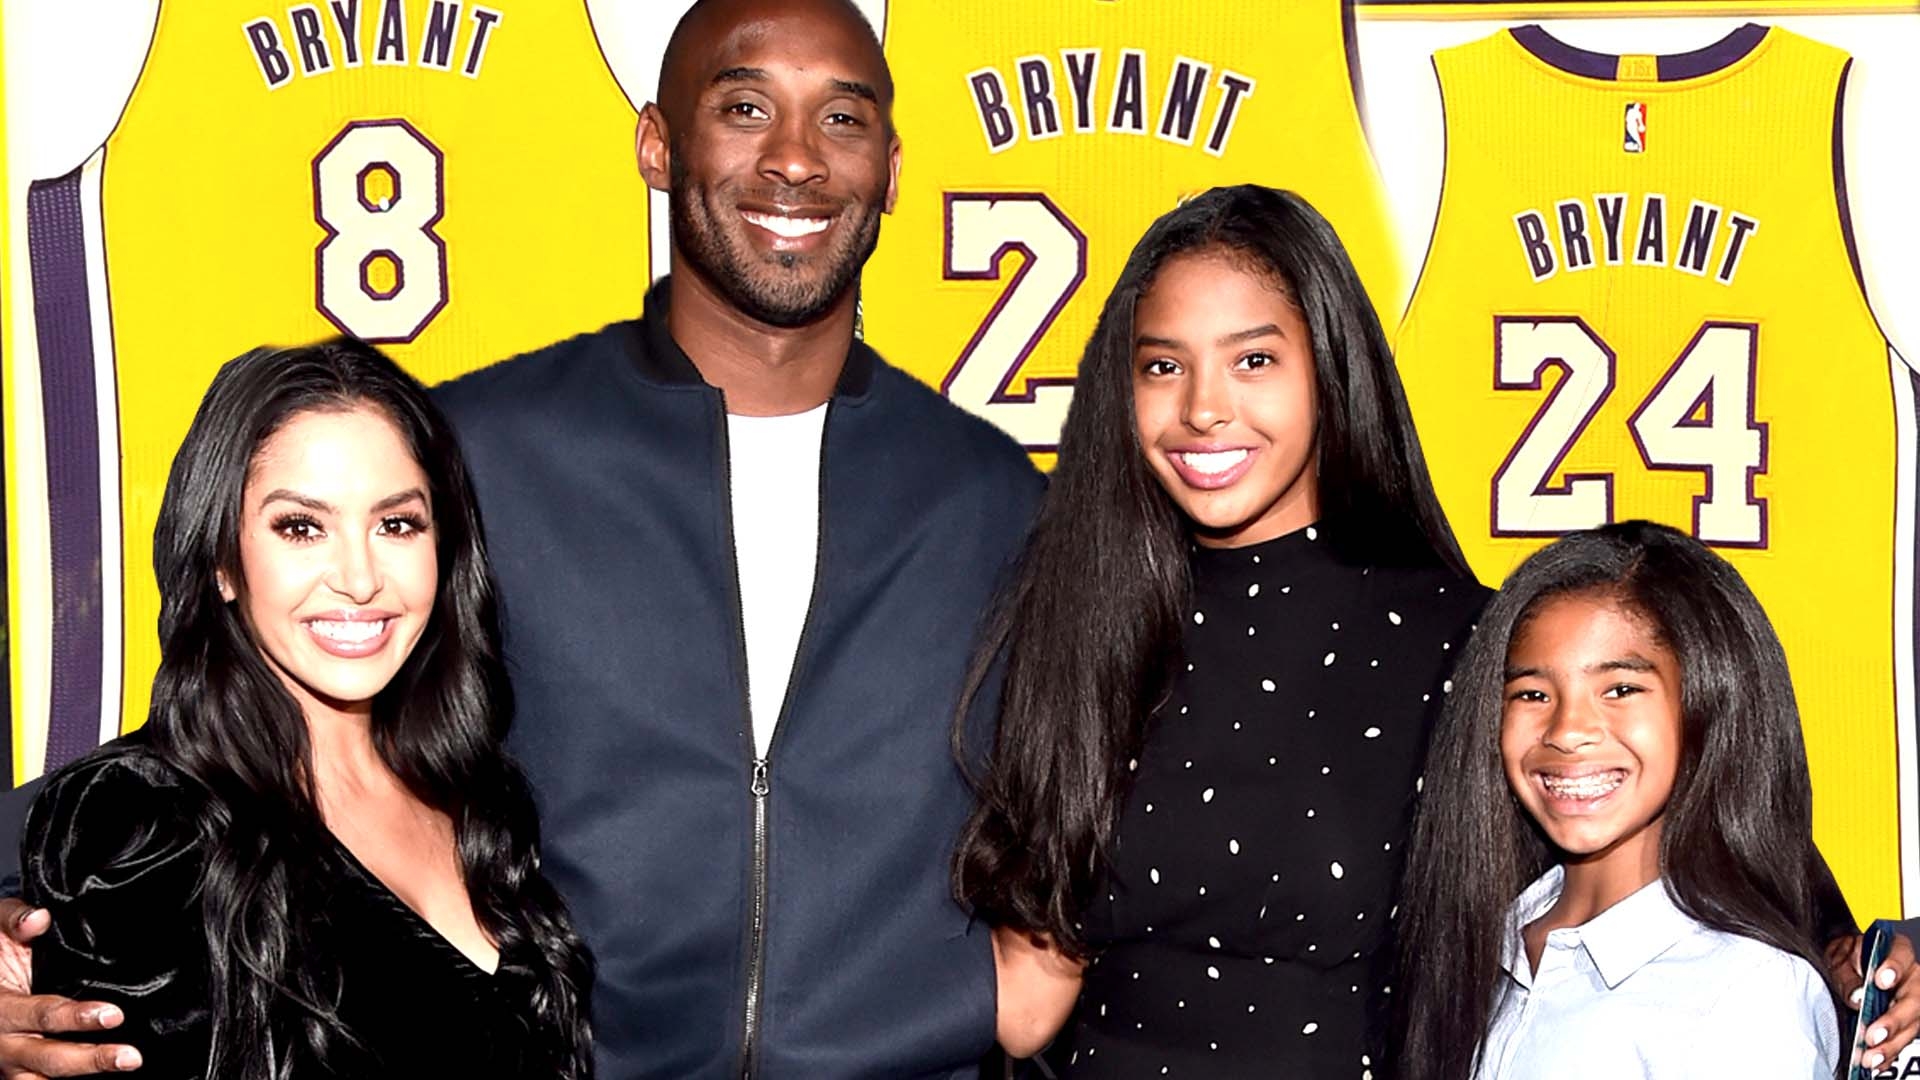 Vanessa Bryant will donate proceeds from lawsuit to Mamba